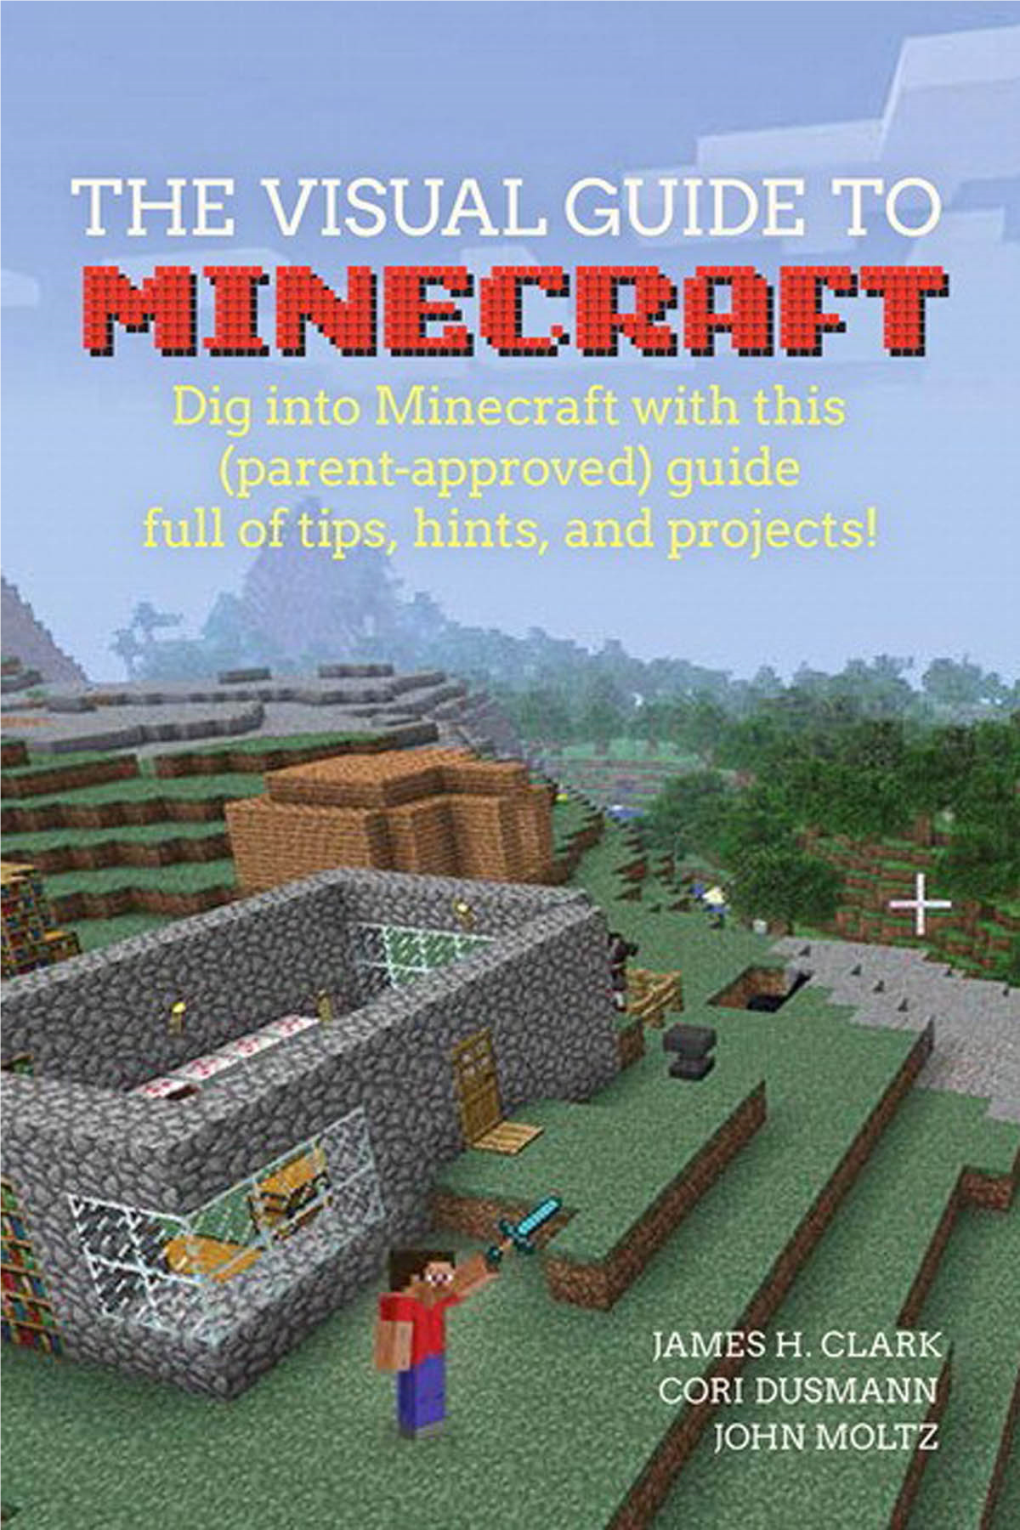 The Visual Guide to Minecraft Dig Into Minecraft with This (Parent-Approved) Guide Full of Tips, Hints, and Projects!